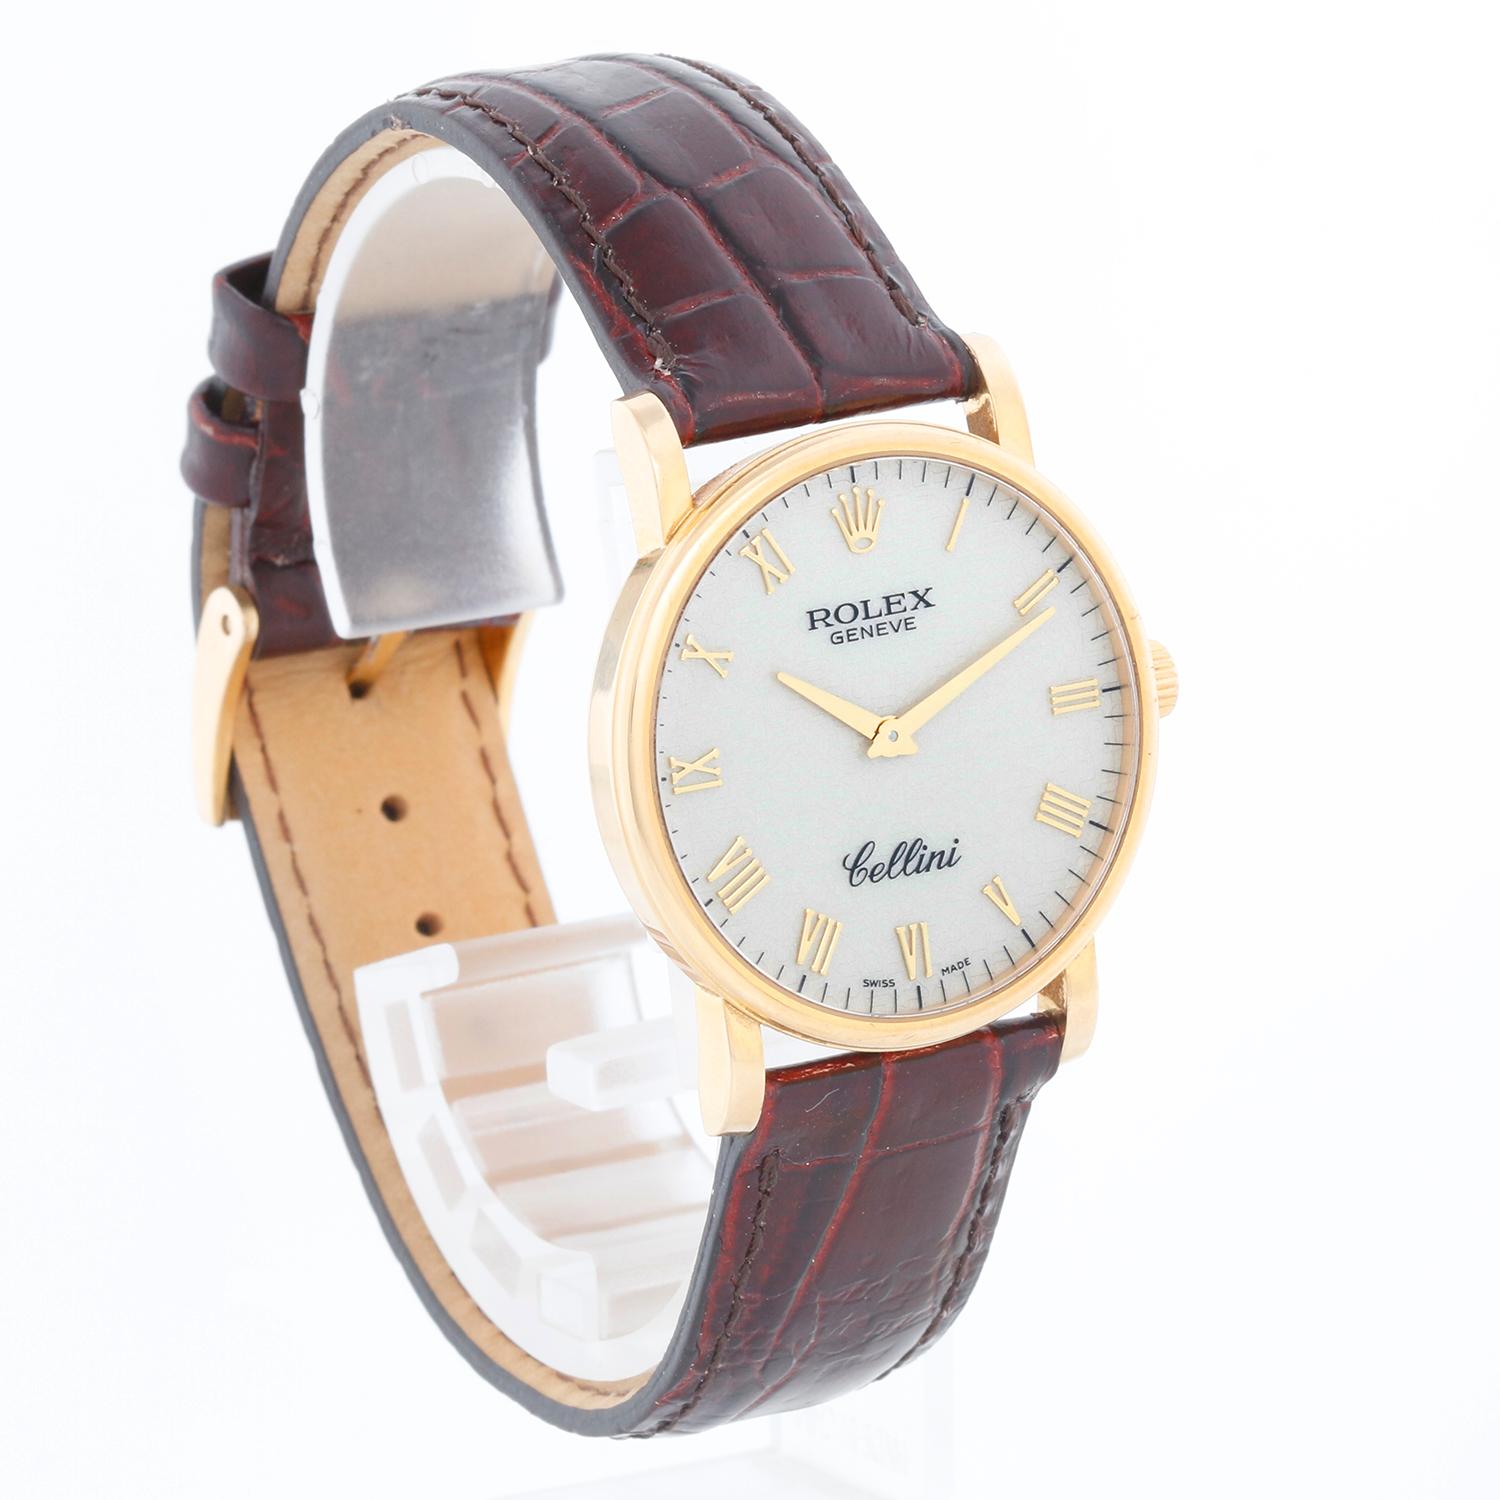 Rolex Cellini Classic 18k Yellow Gold Men's Watch 5115 In Excellent Condition For Sale In Dallas, TX